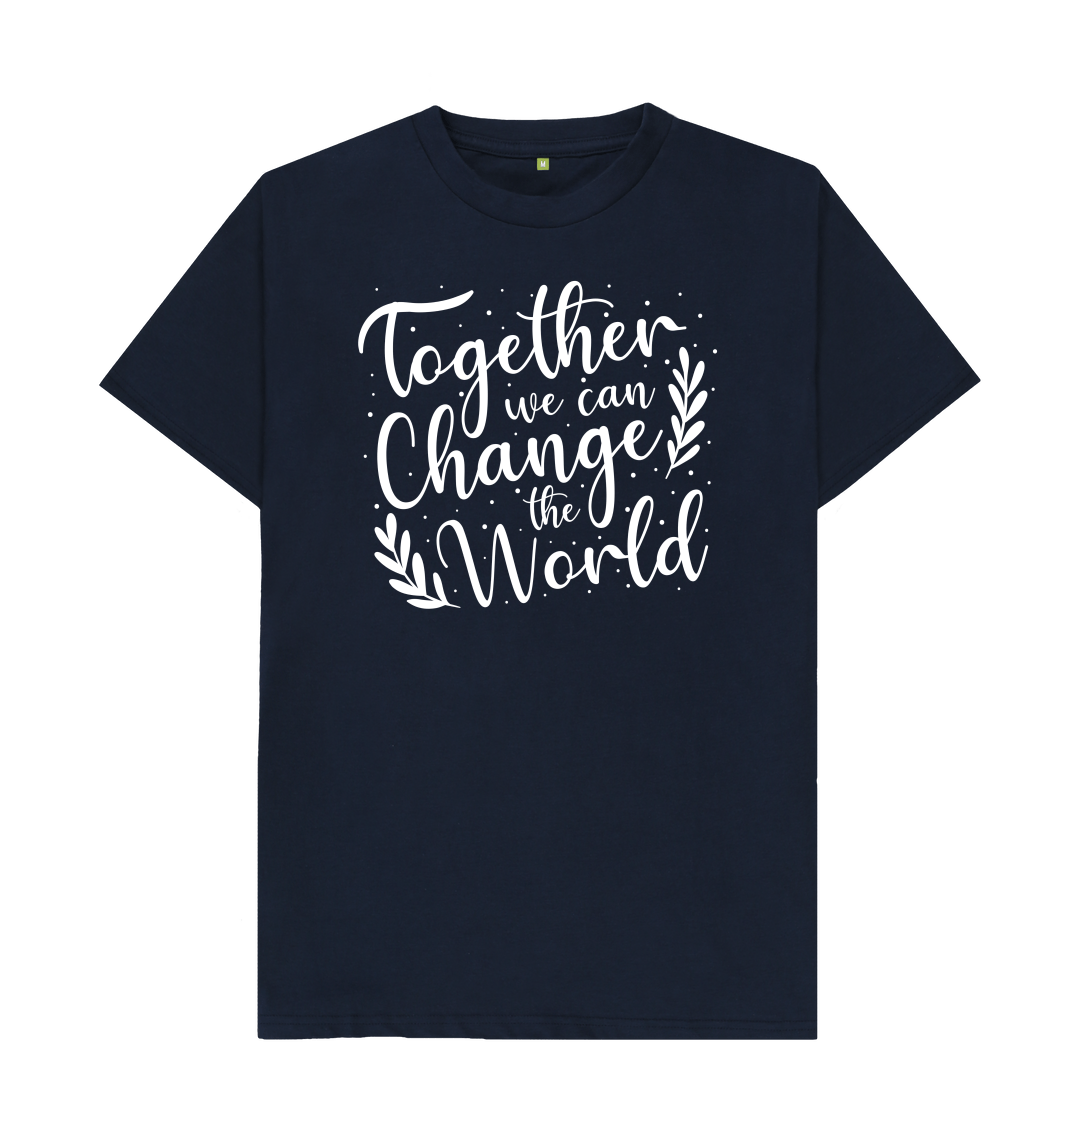 Change The World Together Unisex T Shirt for Men And Women.